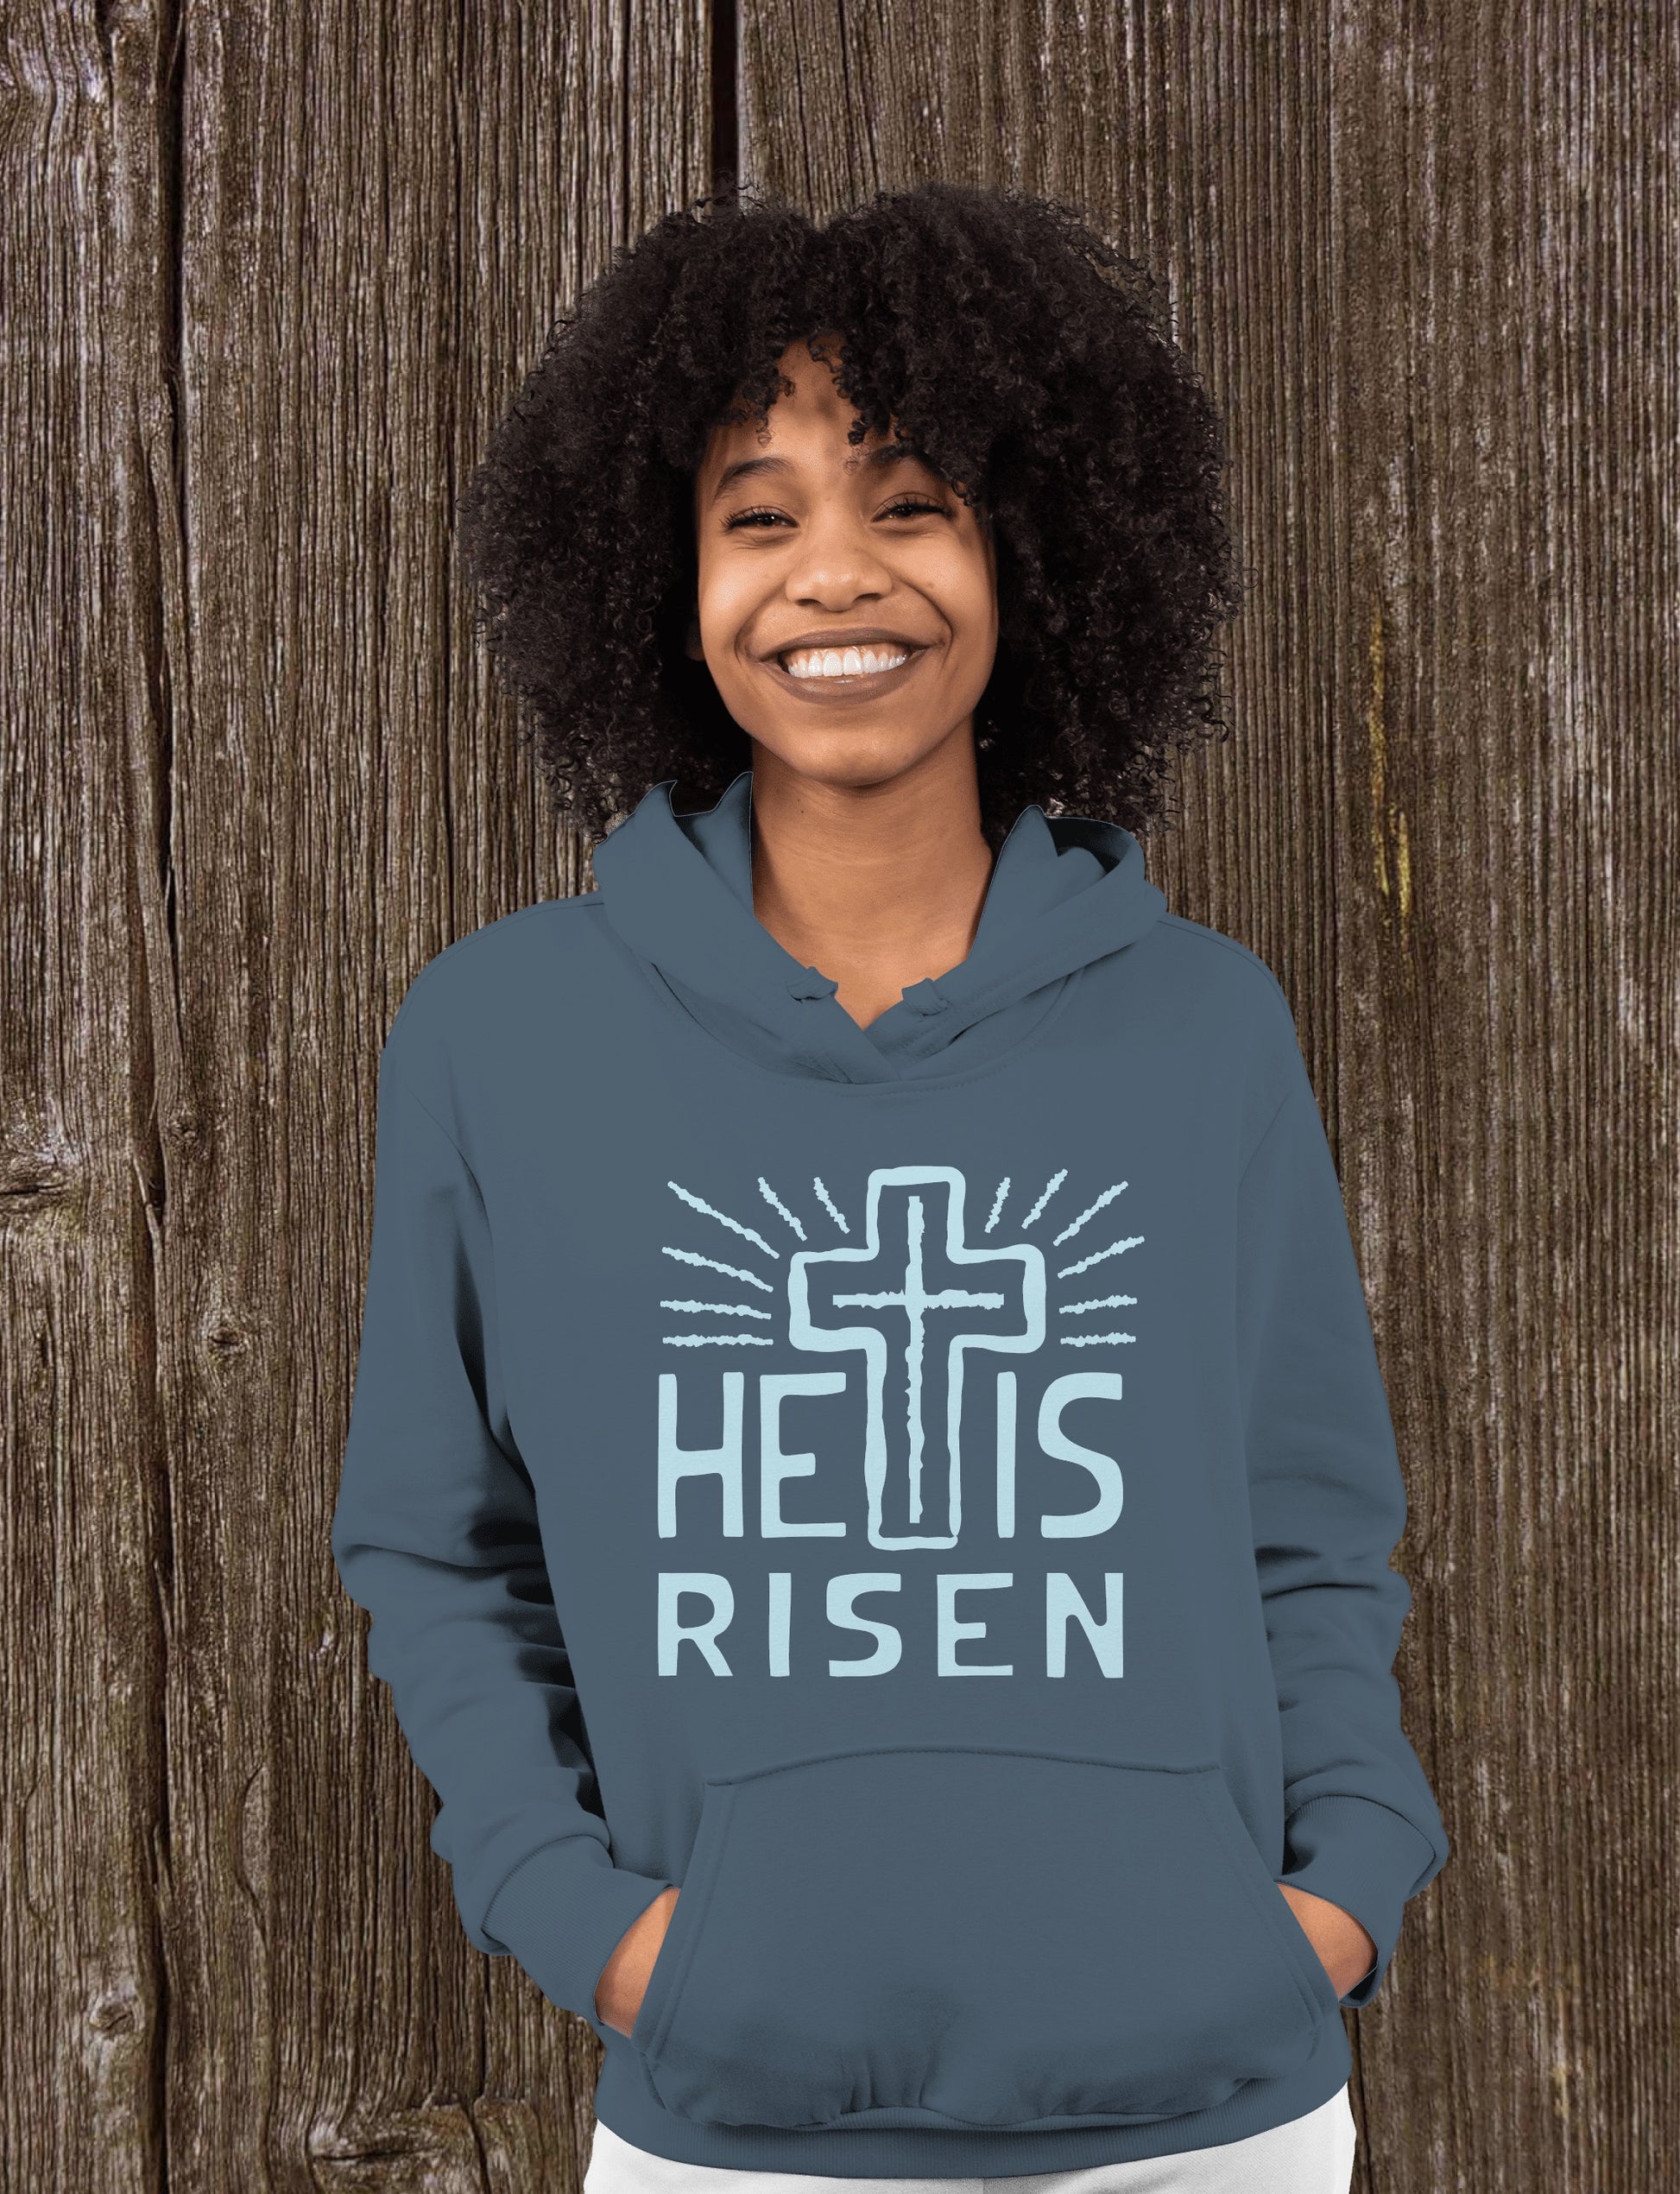 "He Is Risen" T-Shirt - Weave Got Gifts - Unique Gifts You Won’t Find Anywhere Else!